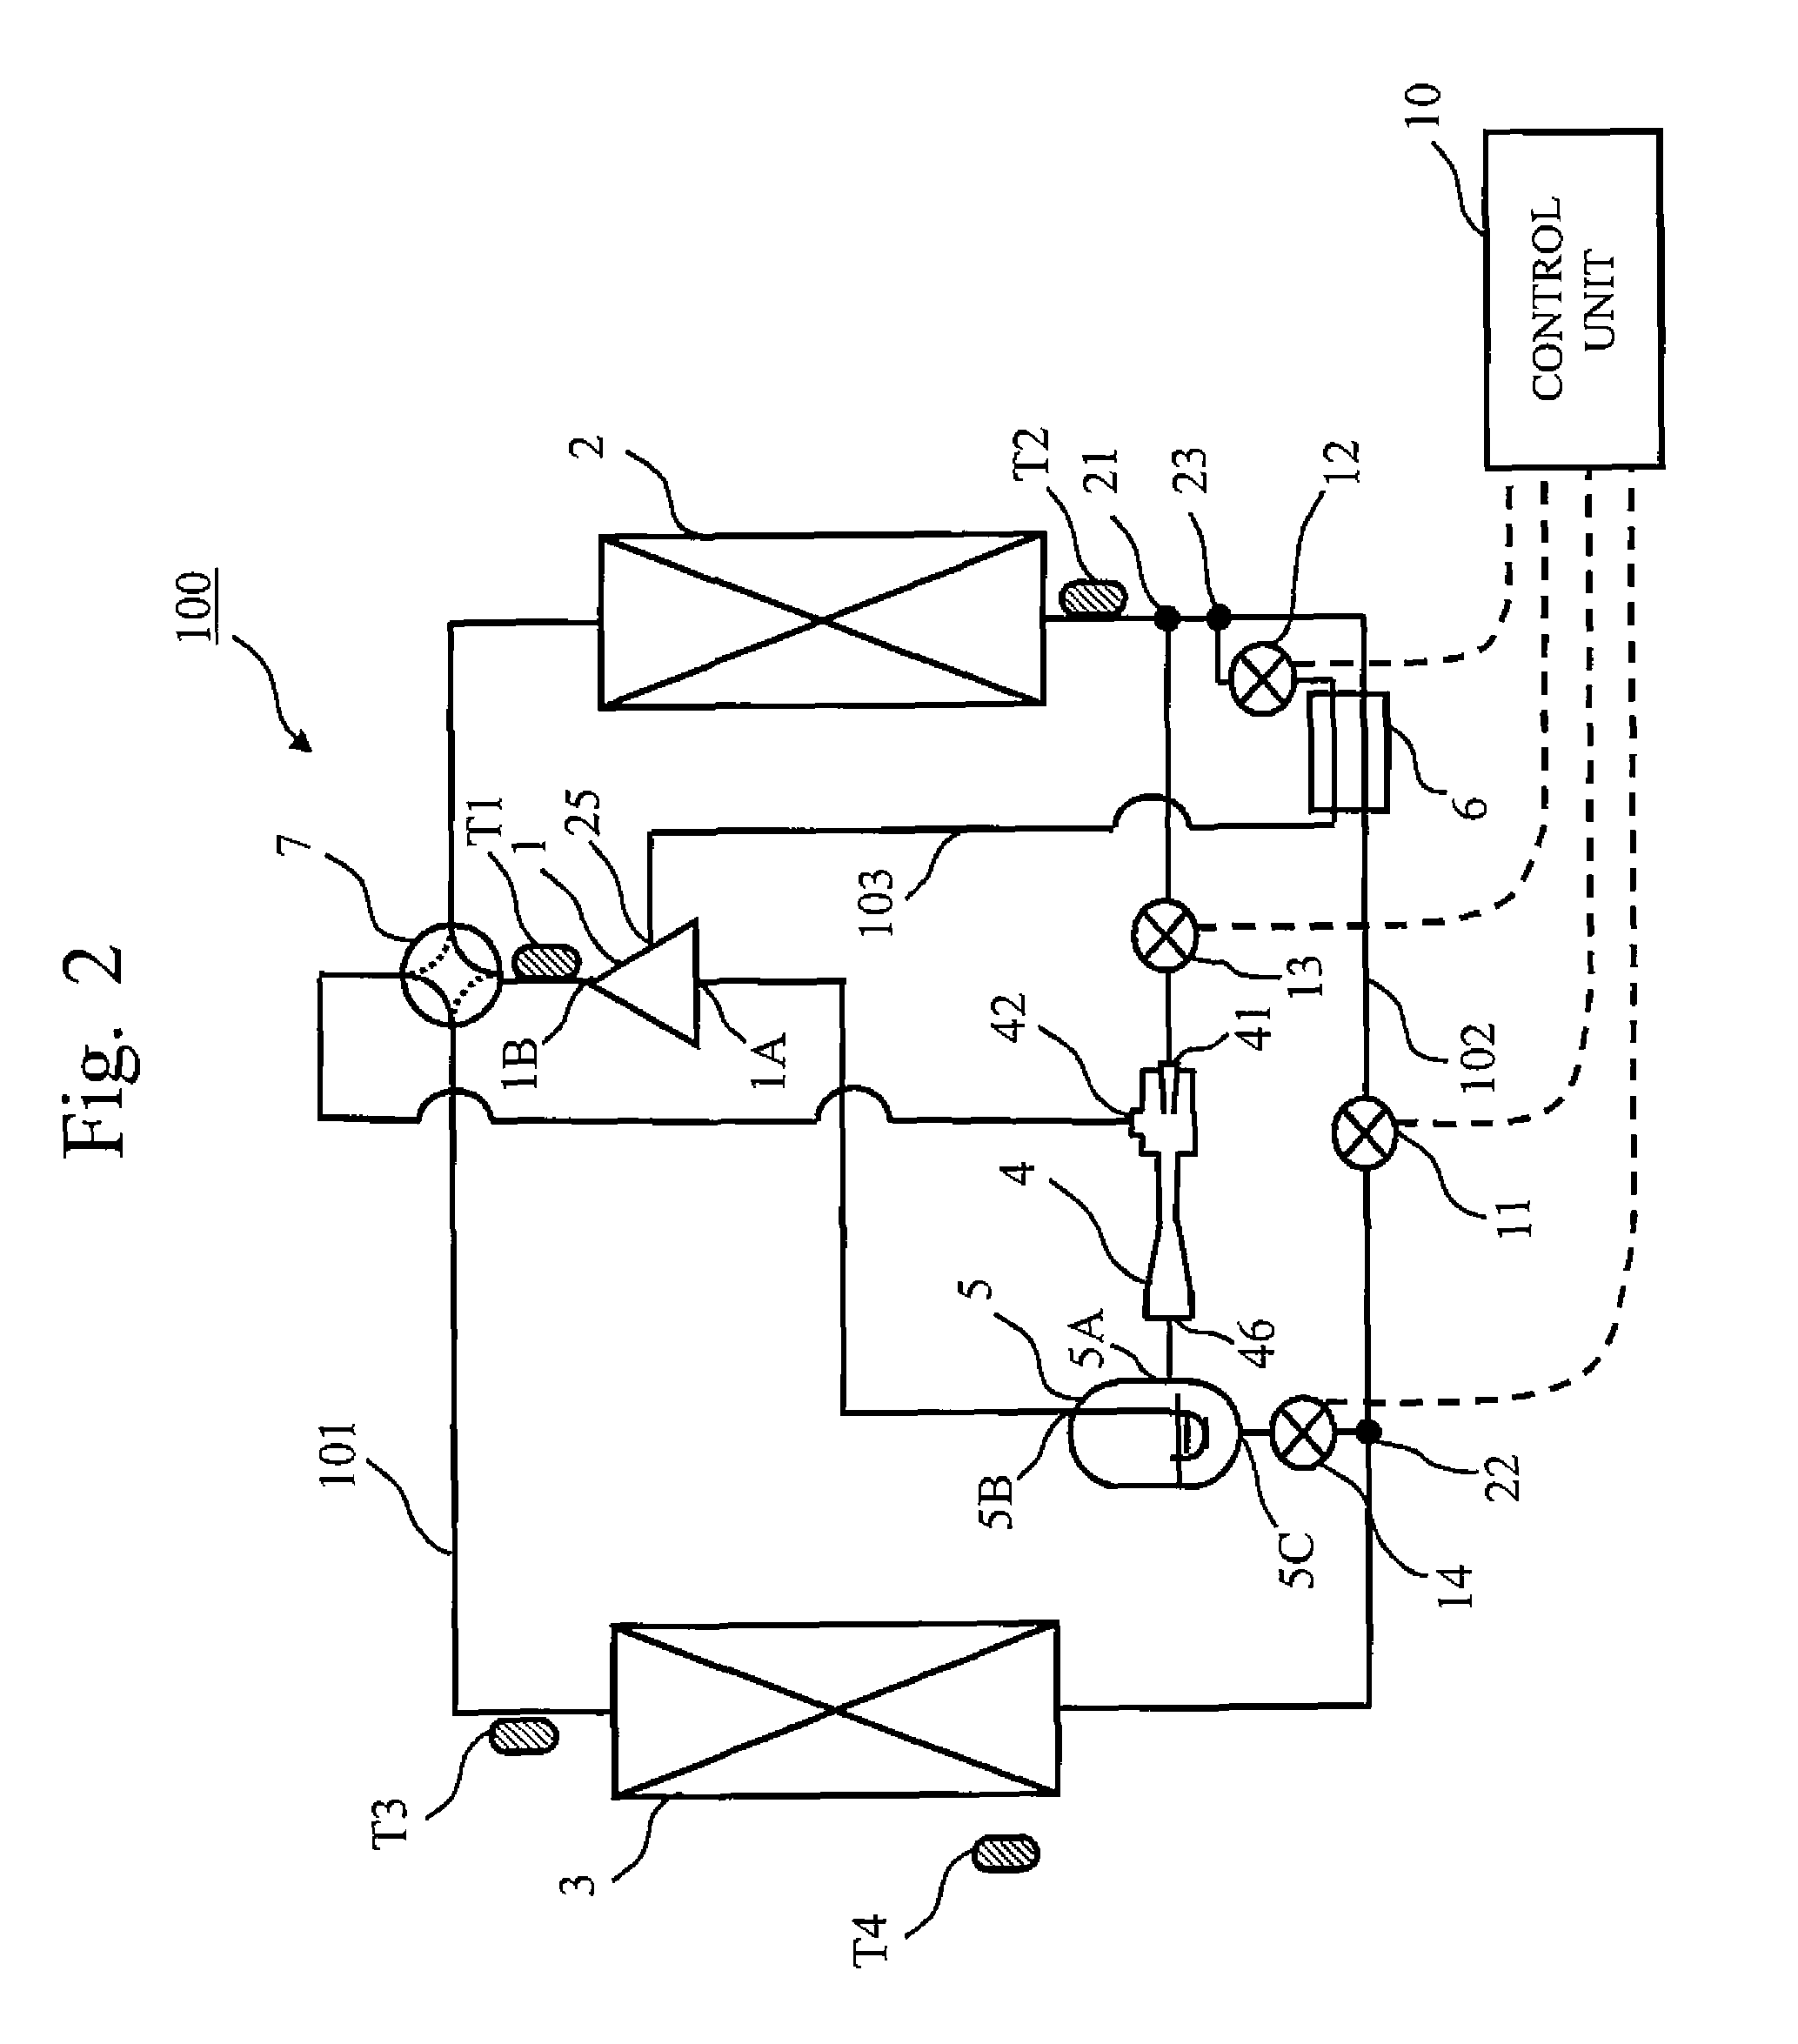 Heat pump apparatus with ejector cycle